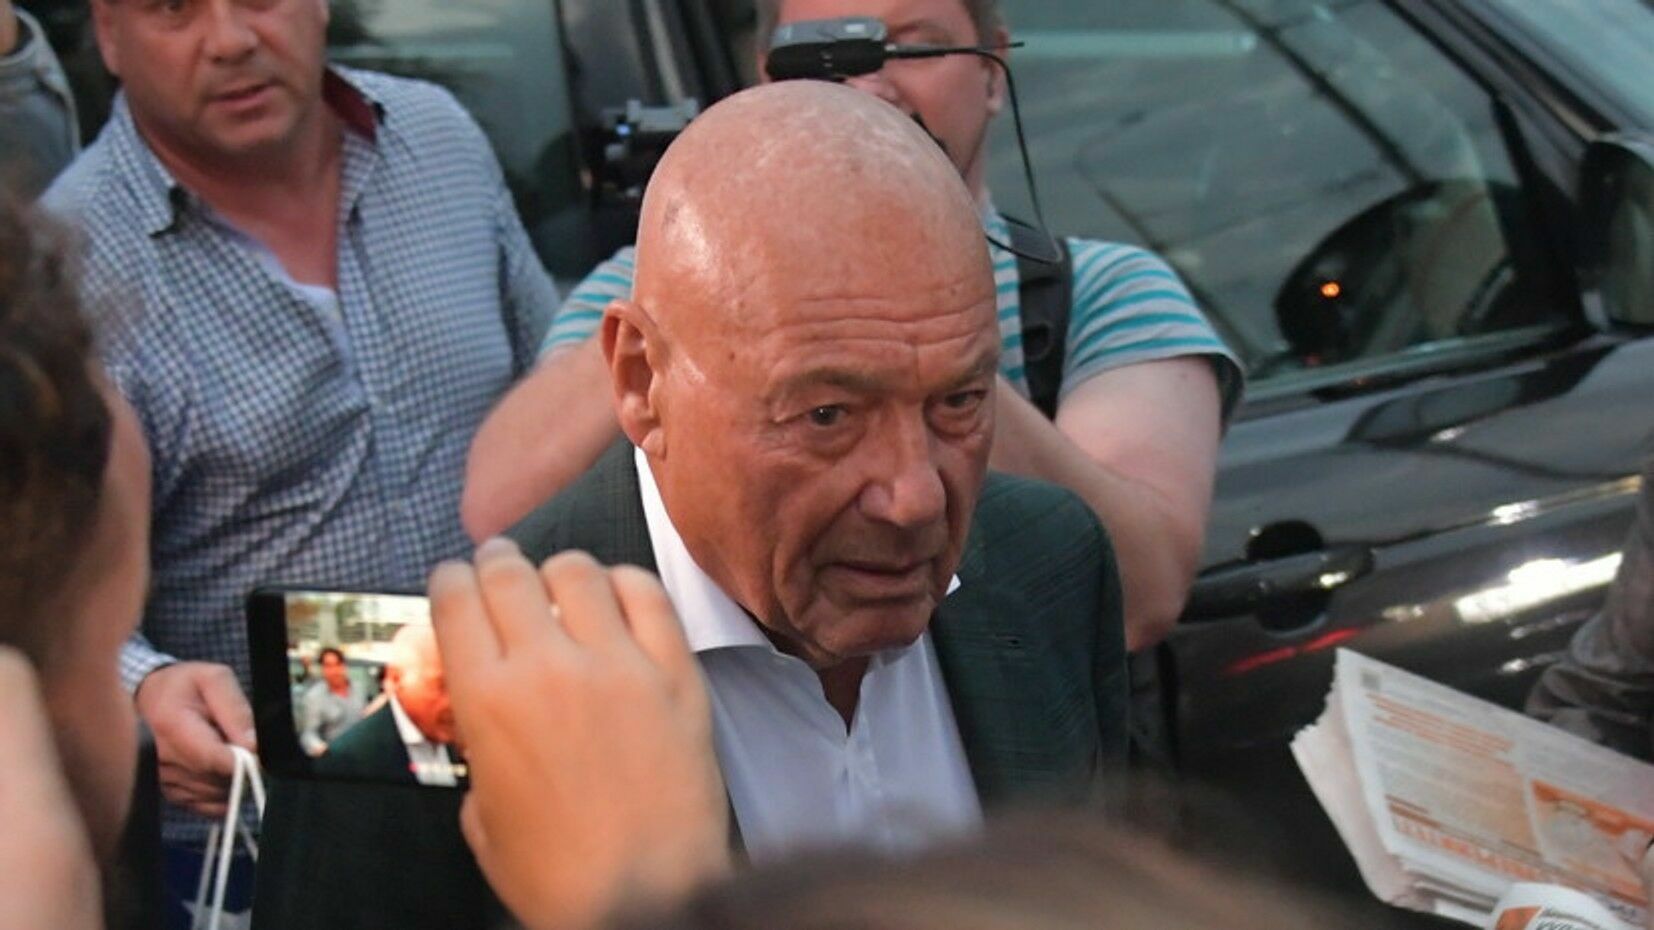 The feast in time of the plague and lockdown: Vladimir Pozner moved around Tbilisi with flashing lights